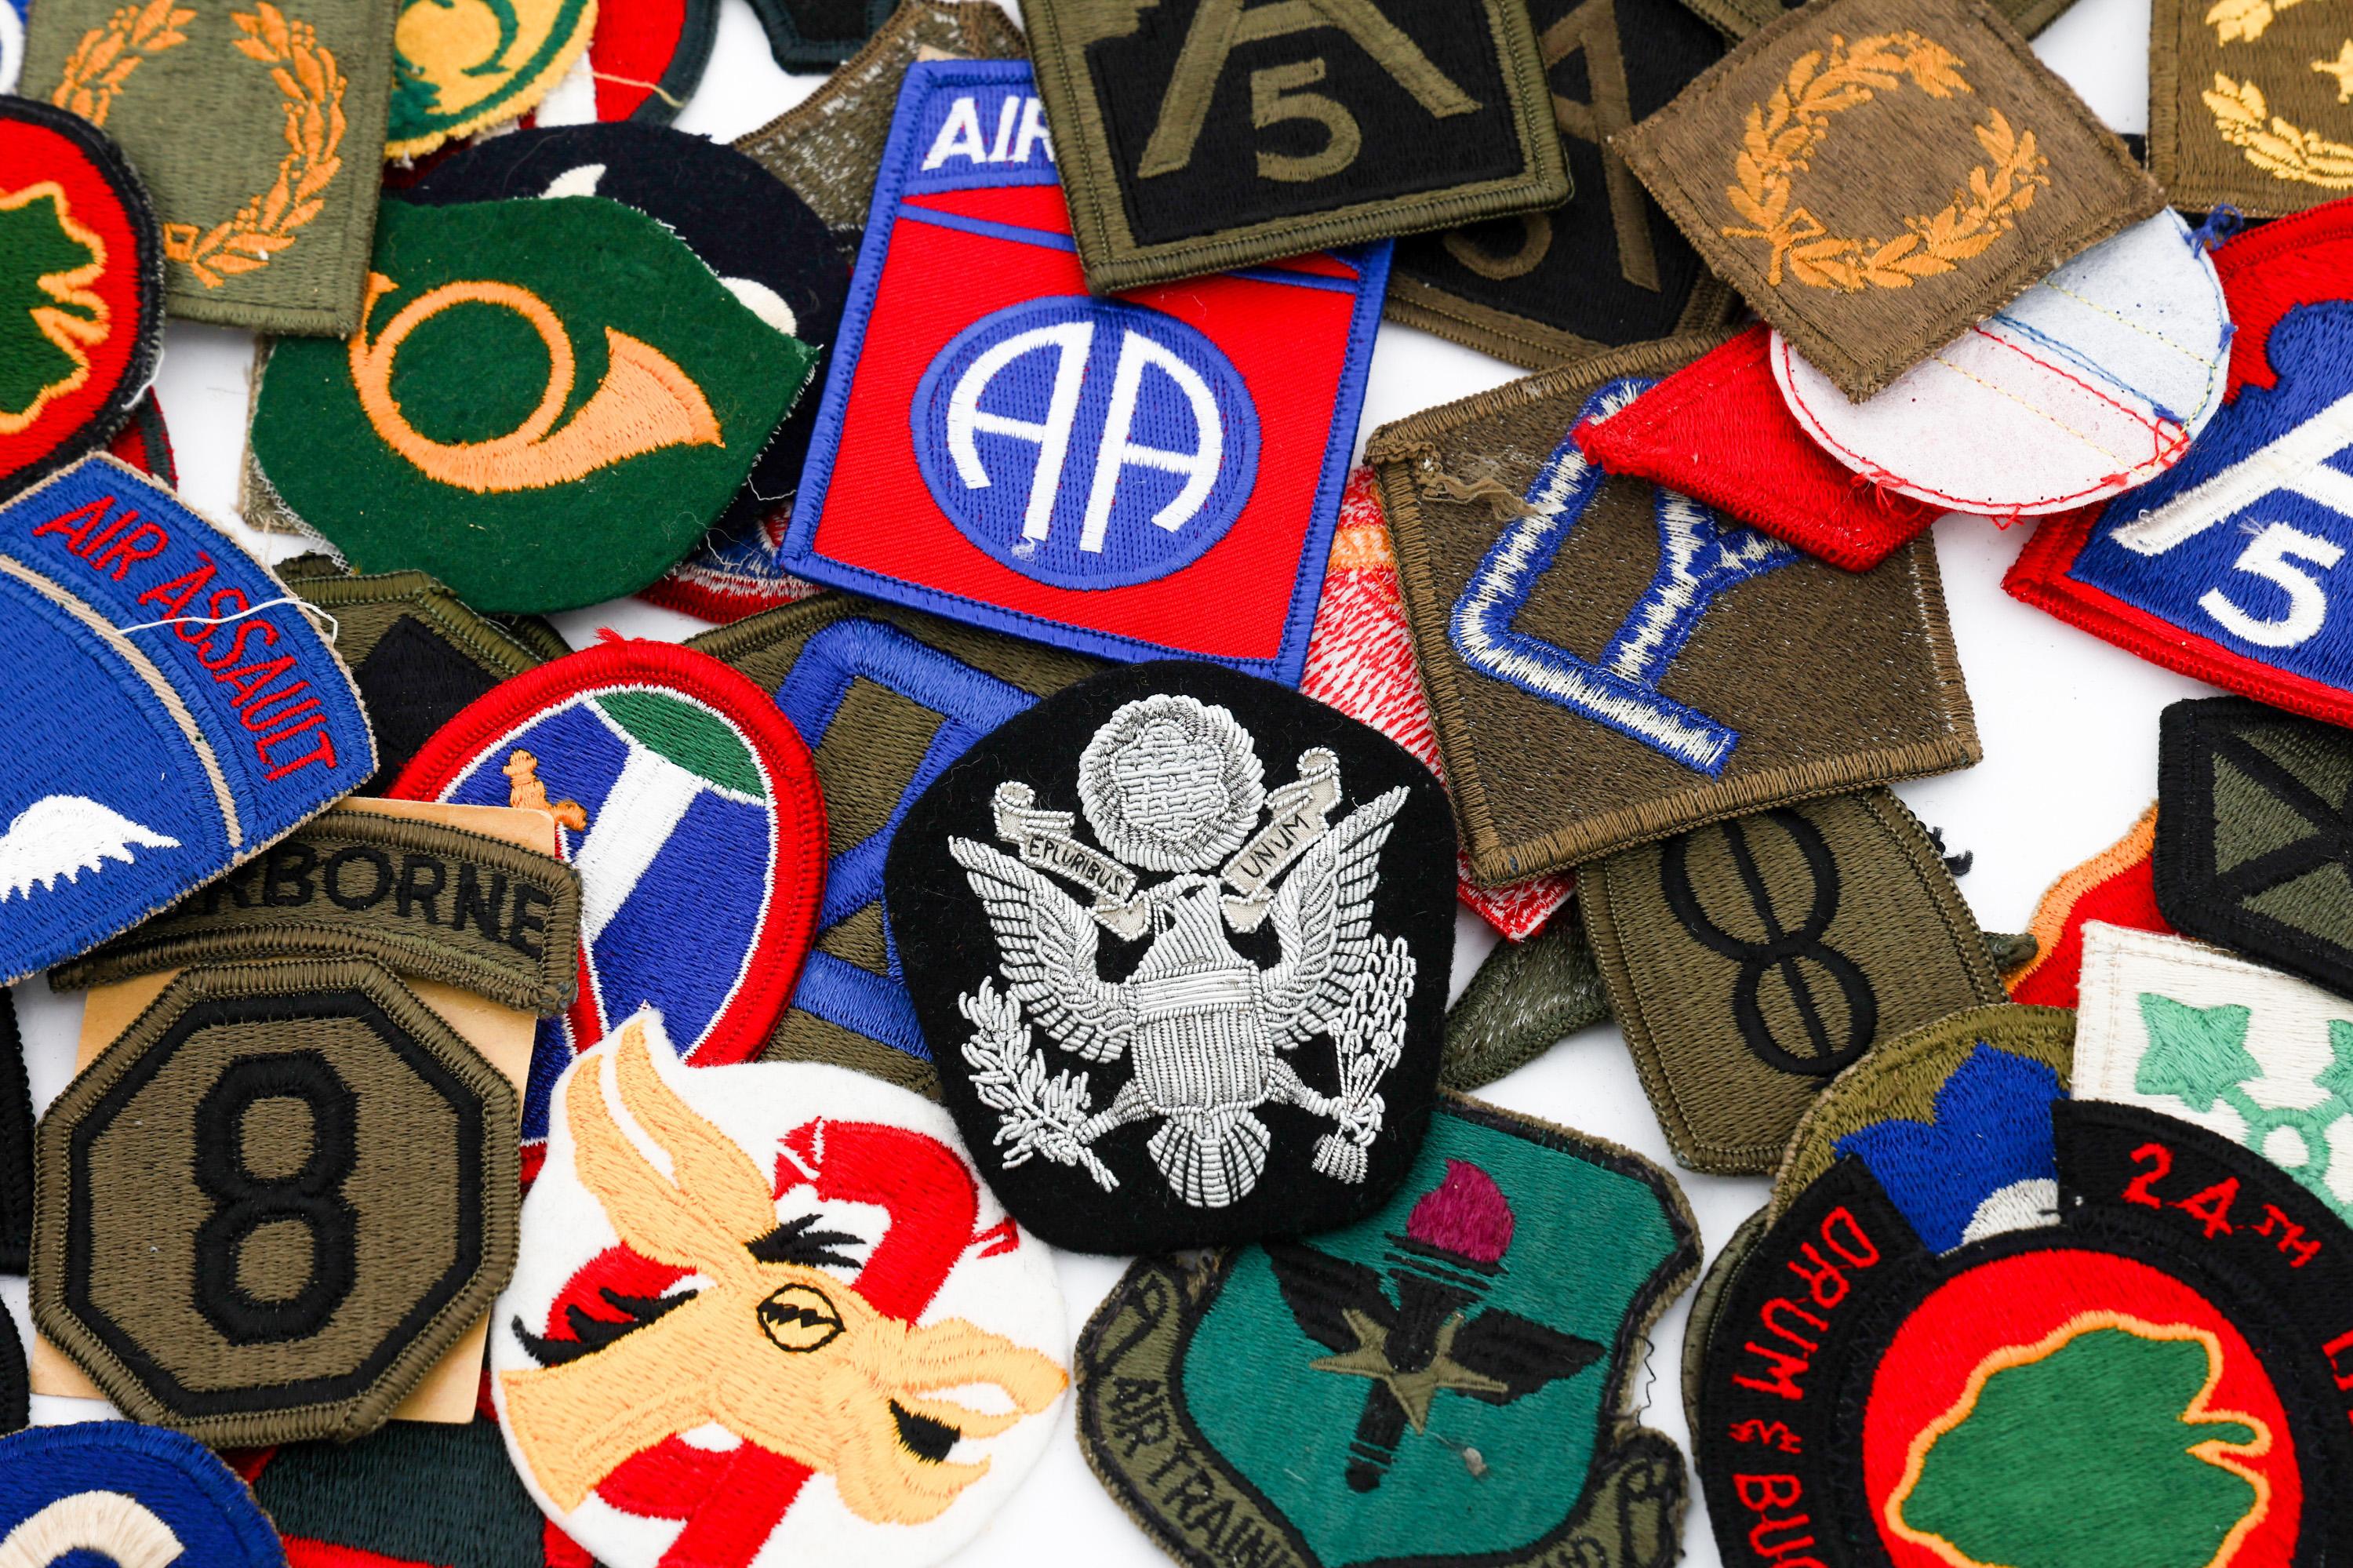 VIETNAM WAR - CURRENT US ARMED FORCES PATCHES